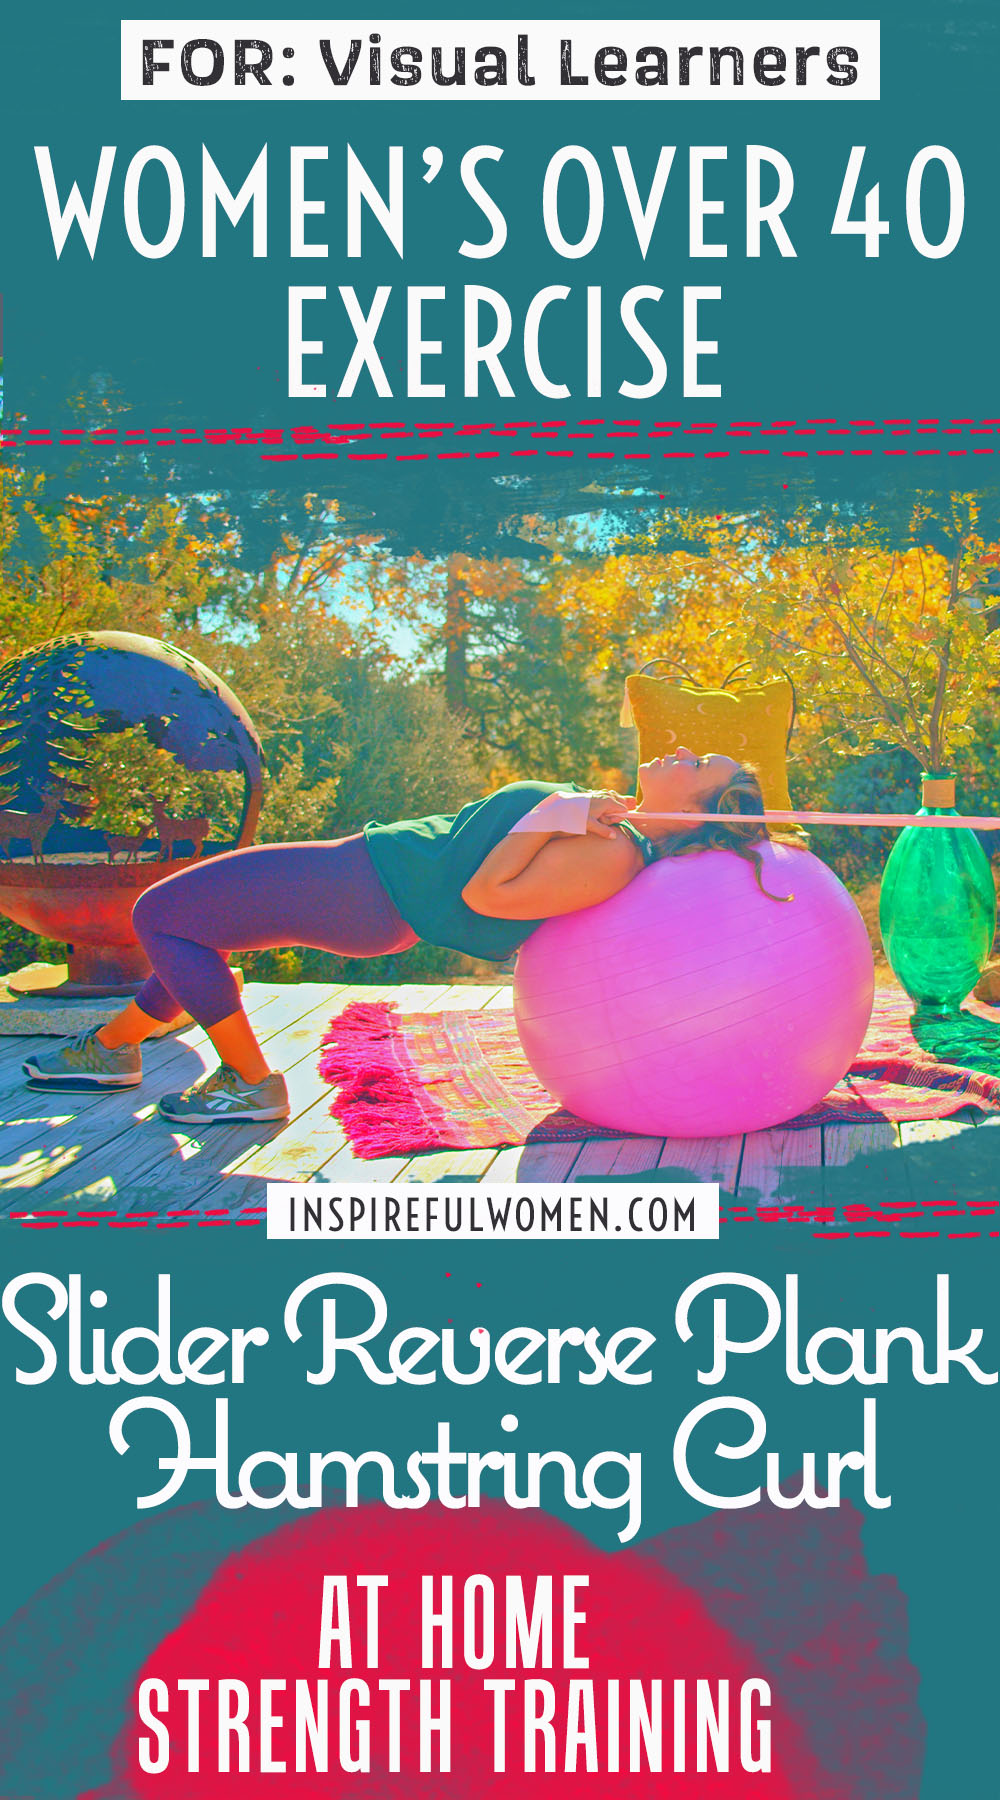 slider-reverse-plank-hamstring-curl-single-leg-curl-at-home-stability-ball-exercise-women-40-plus